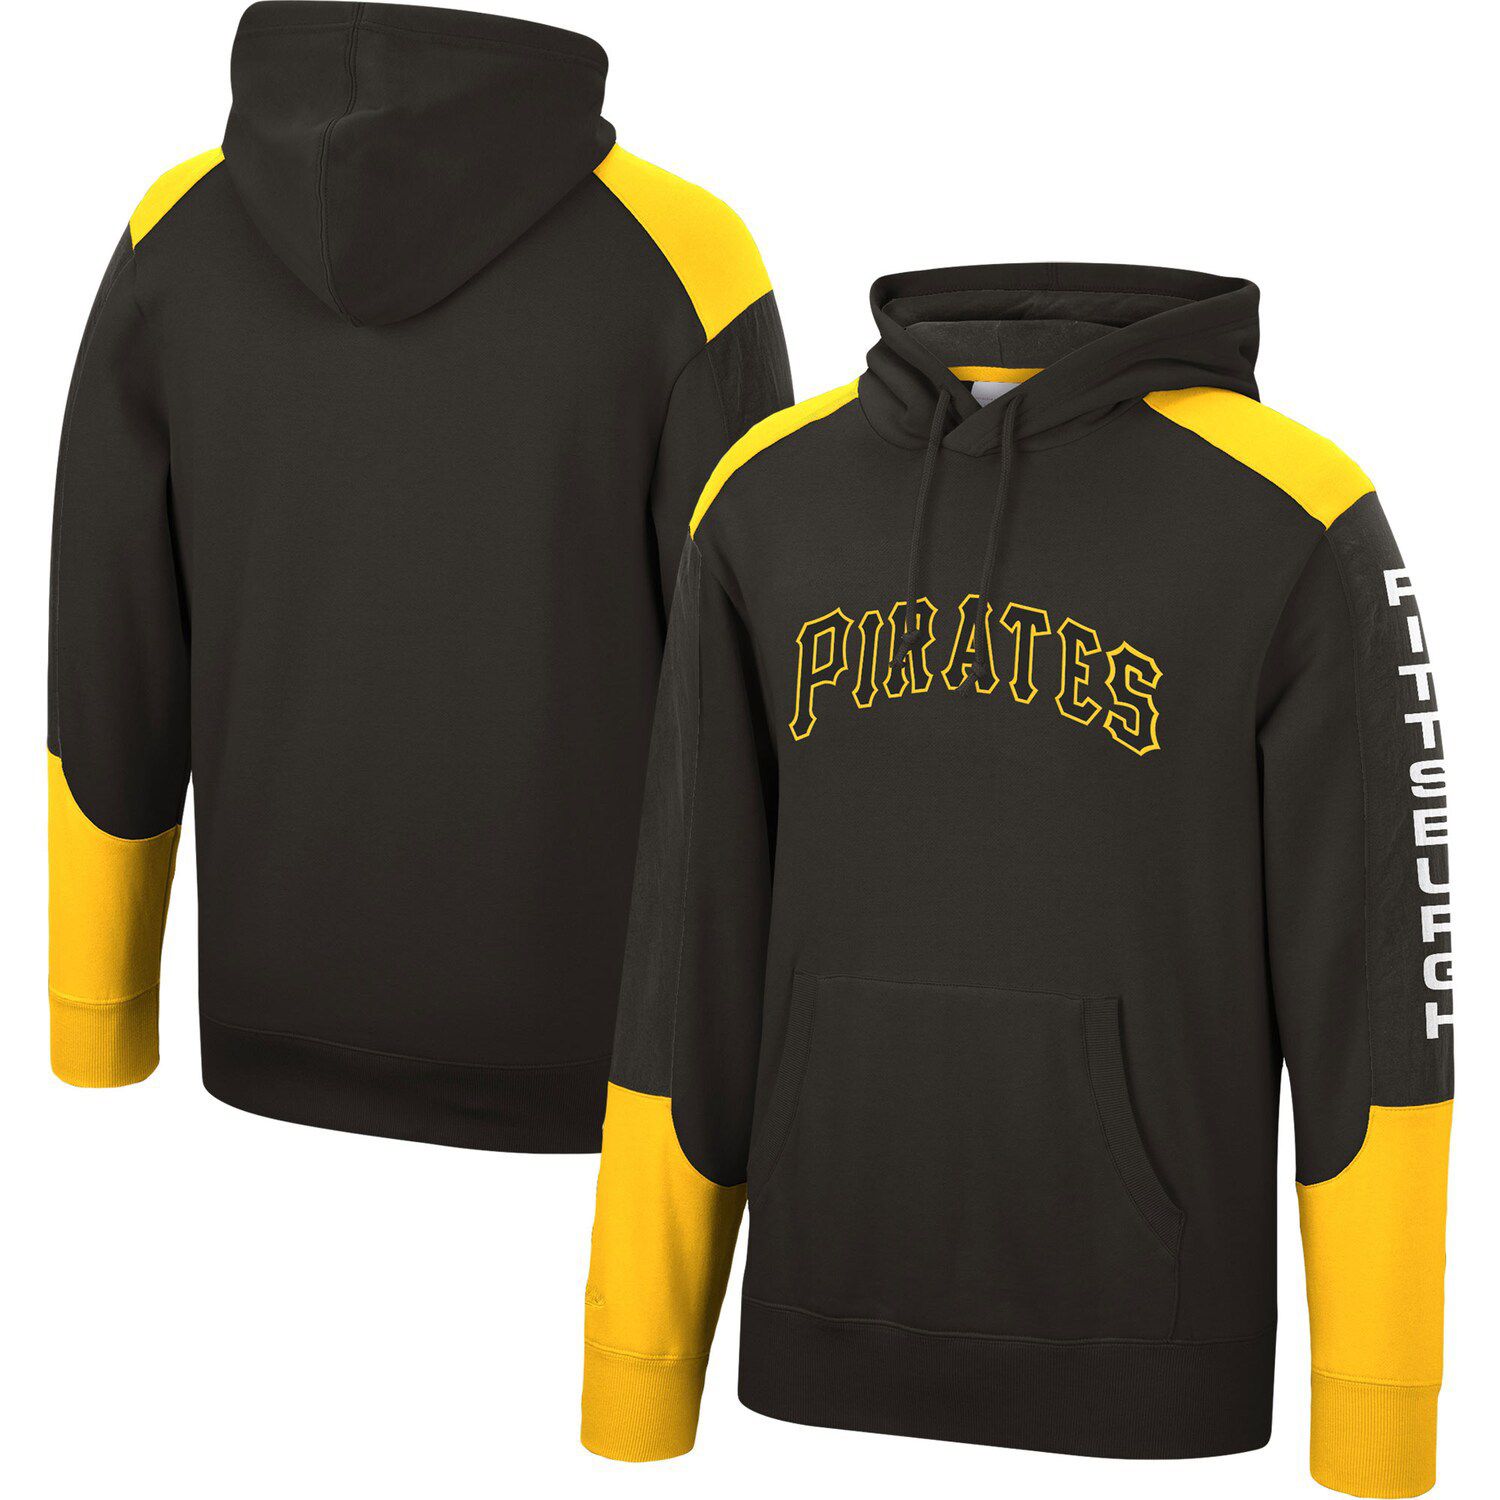 Image for Unbranded Men's Mitchell & Ness Black Pittsburgh Pirates Fusion Fleece Pullover Hoodie at Kohl's.